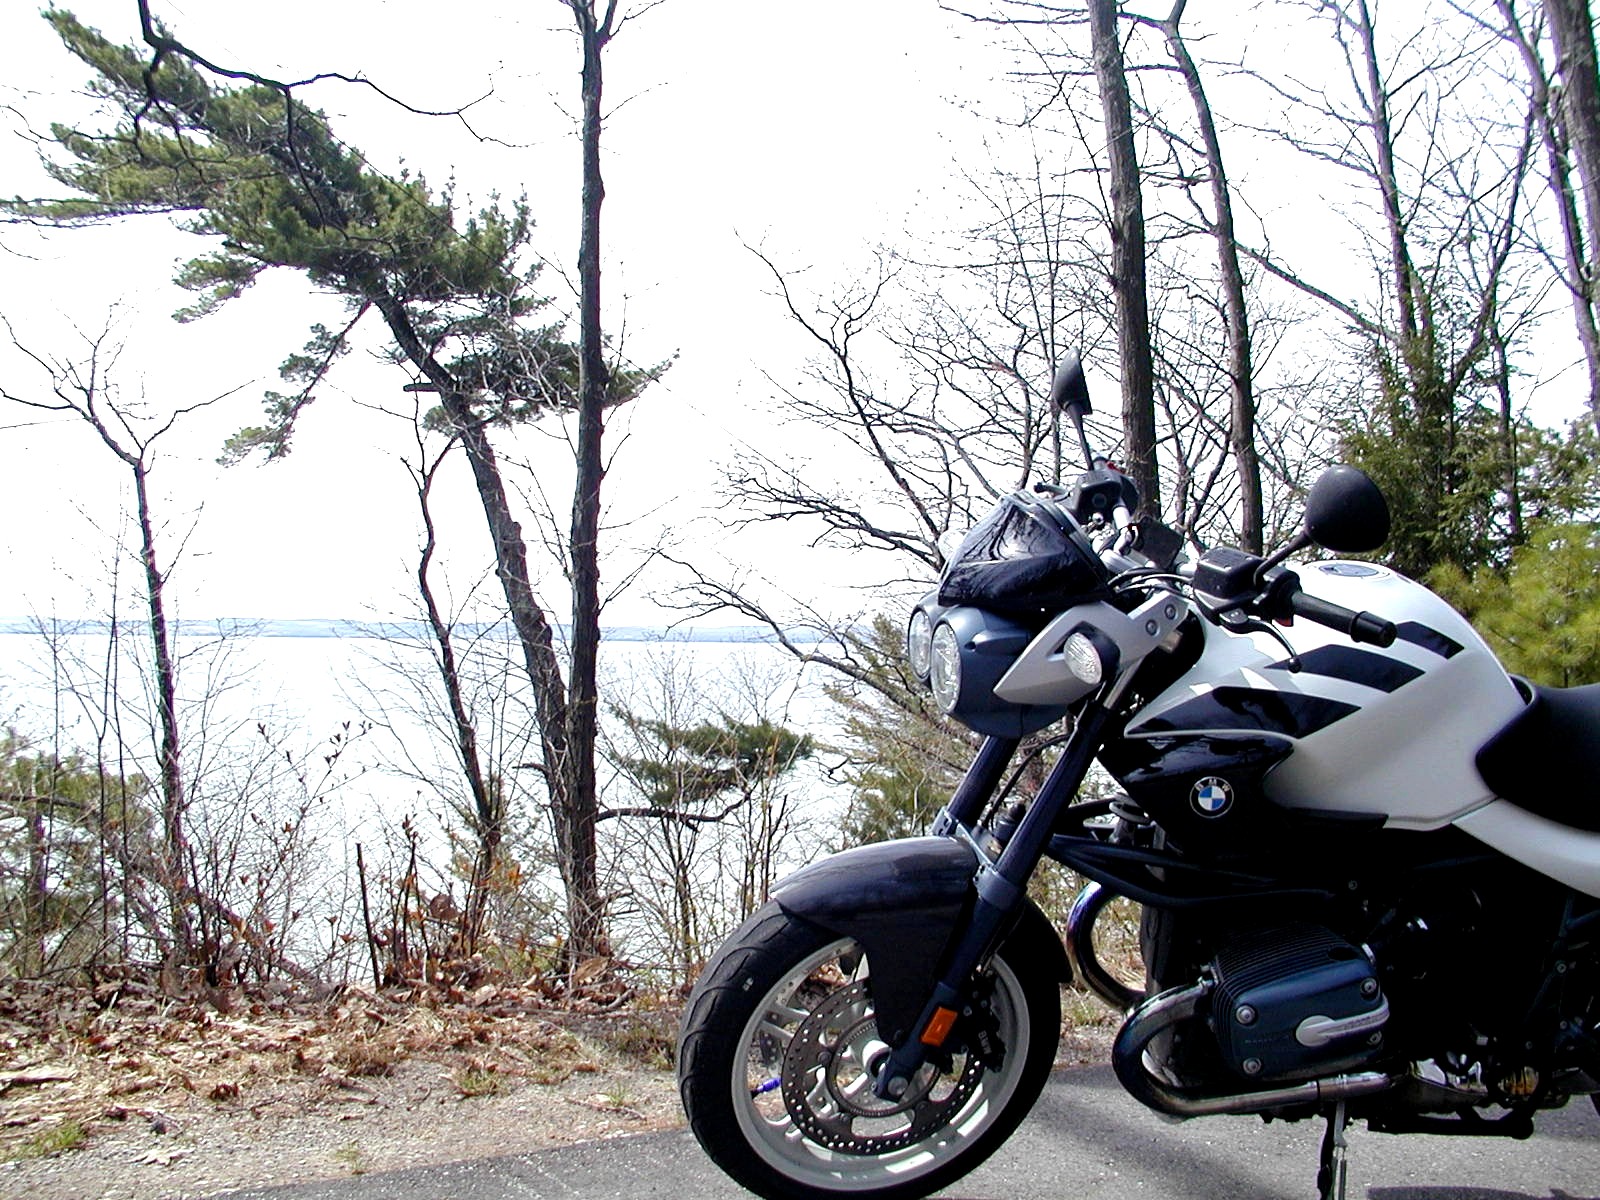 BMW Motorcycles of Grand Rapids - A Review: Great Bikes: Poor Service